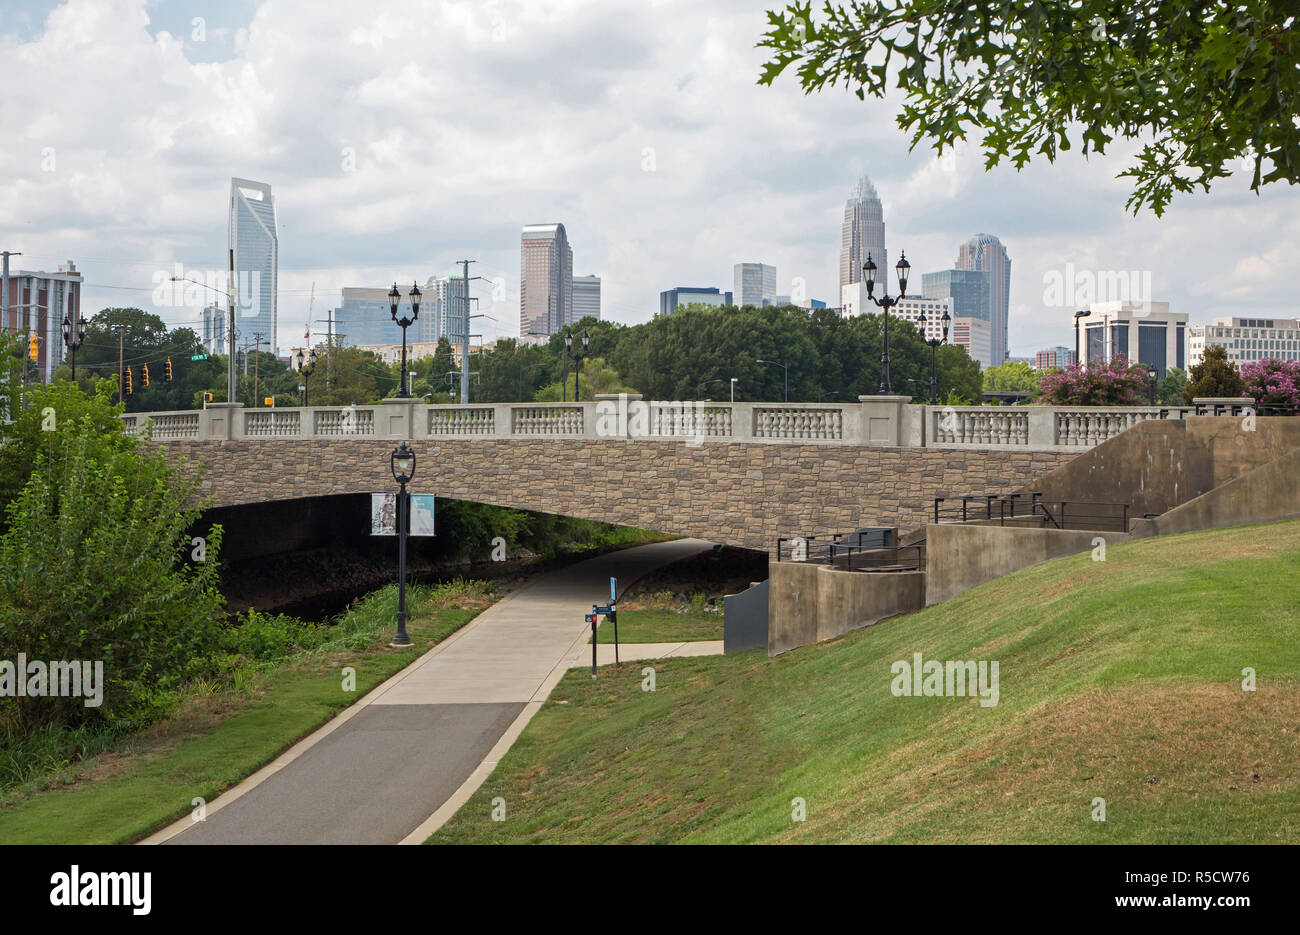 CHARLOTTE, NC - August 9, 2015: View of uptown Charlotte, North Carolina, from the Little Sugar Creek Greenway. Stock Photo